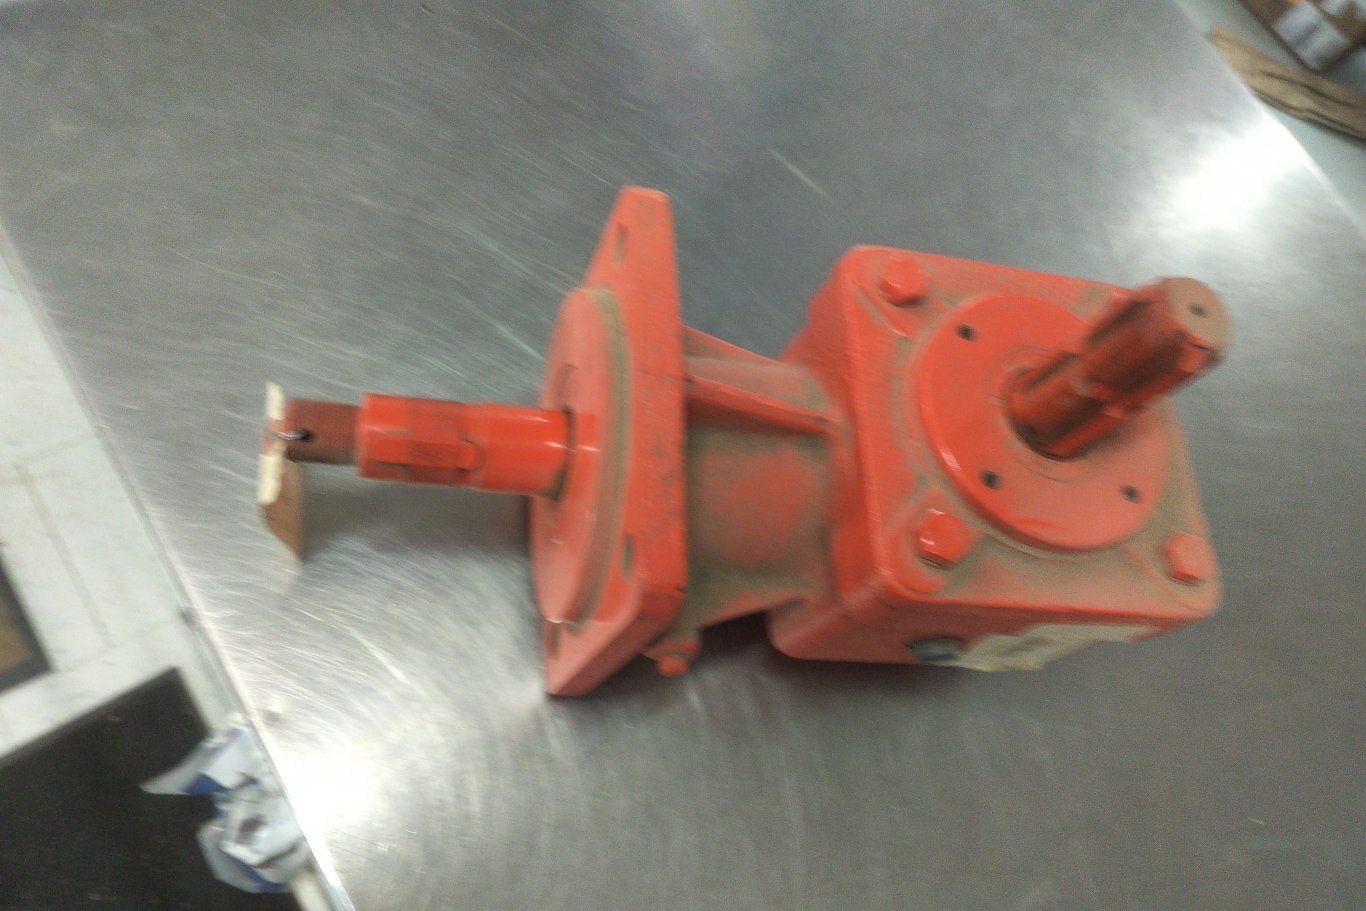 New Gear Box for a Rotary Cutter